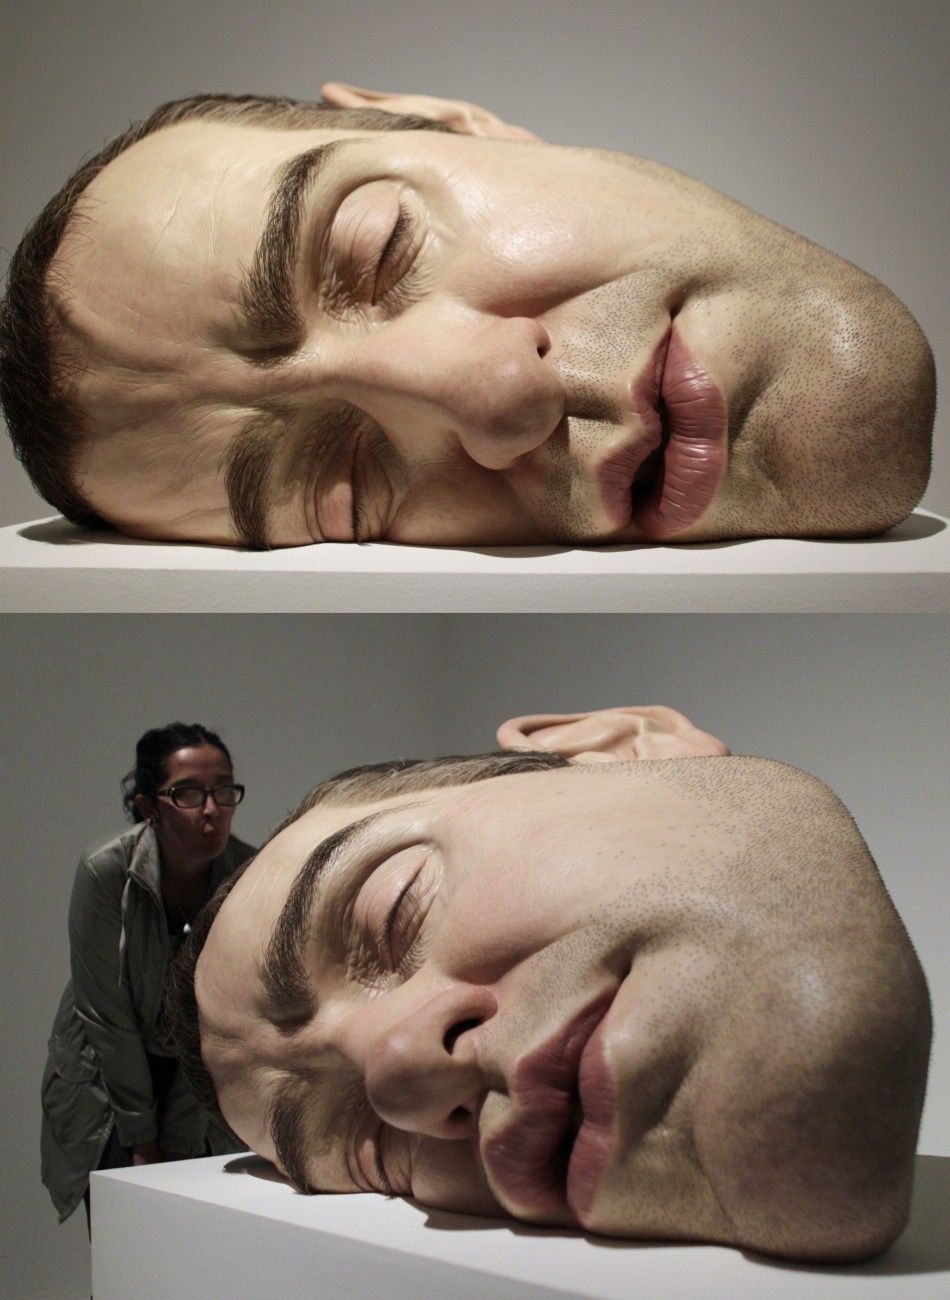 Life-like Human Sculptures in a Mexico Museum Amaze Visitors